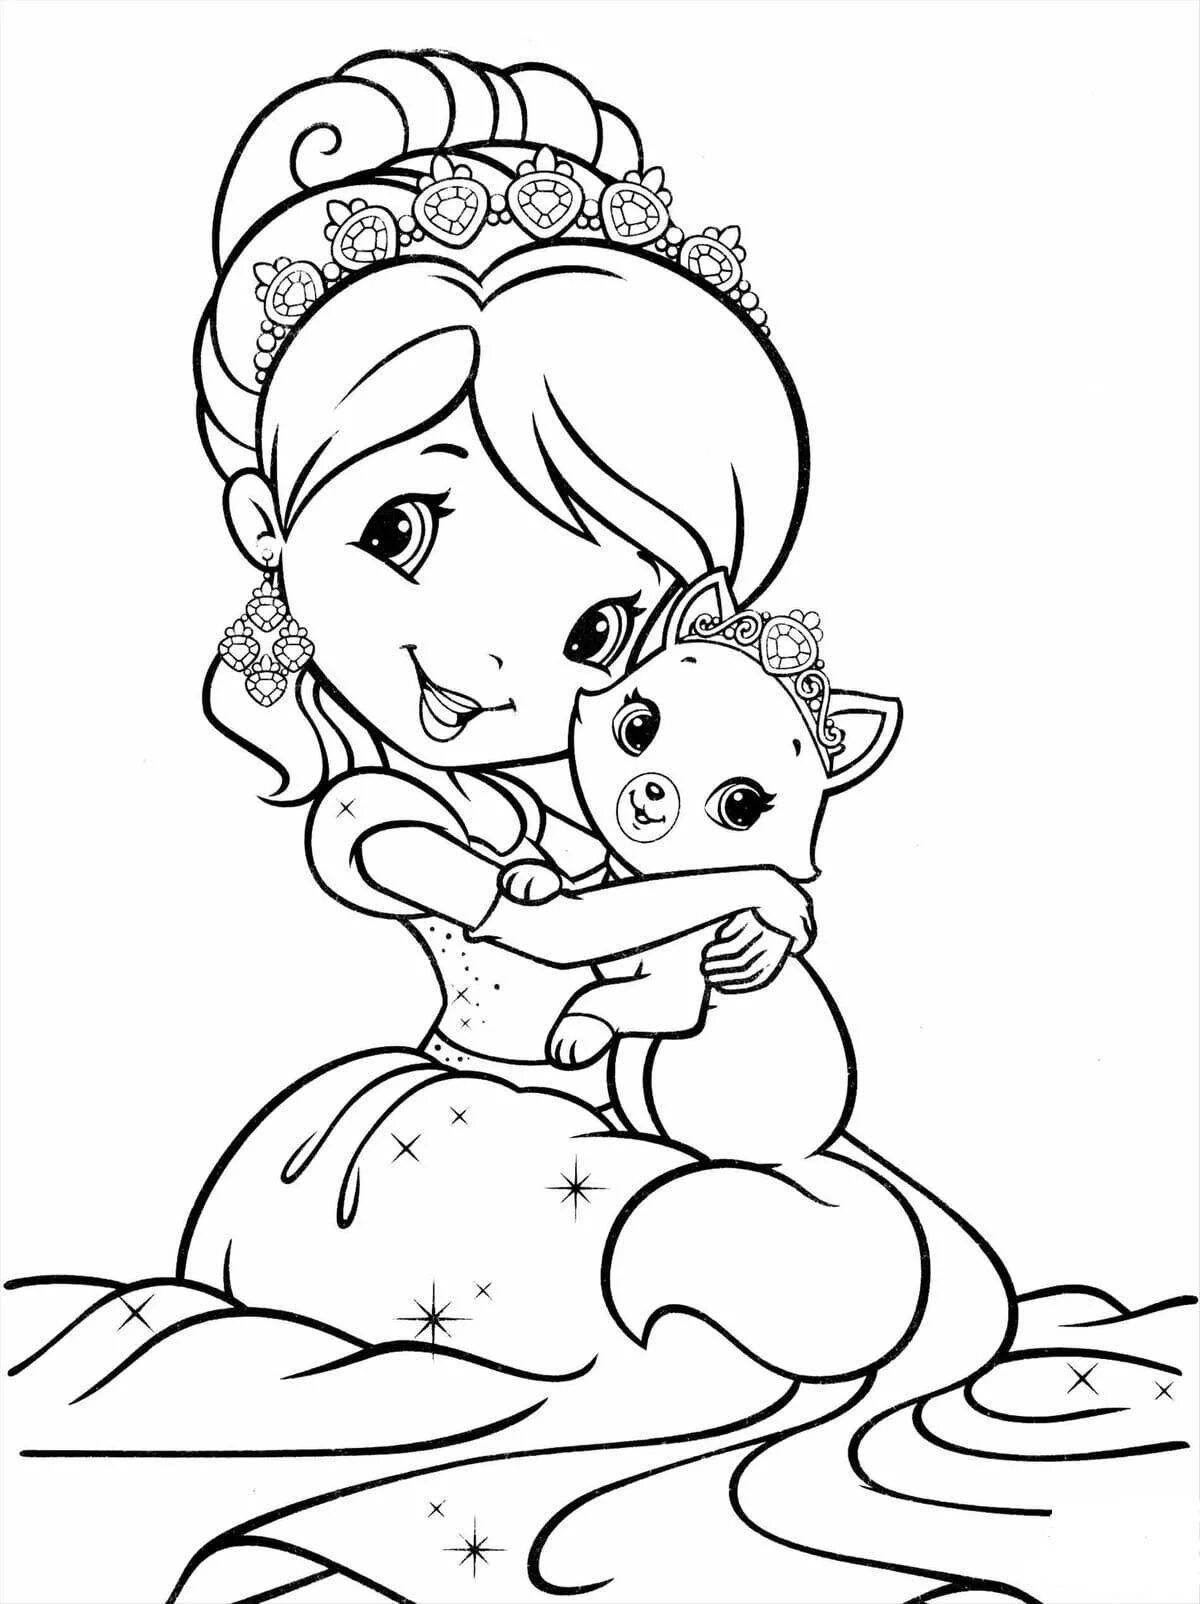 Great coloring book for girls princesses 3-4 years old